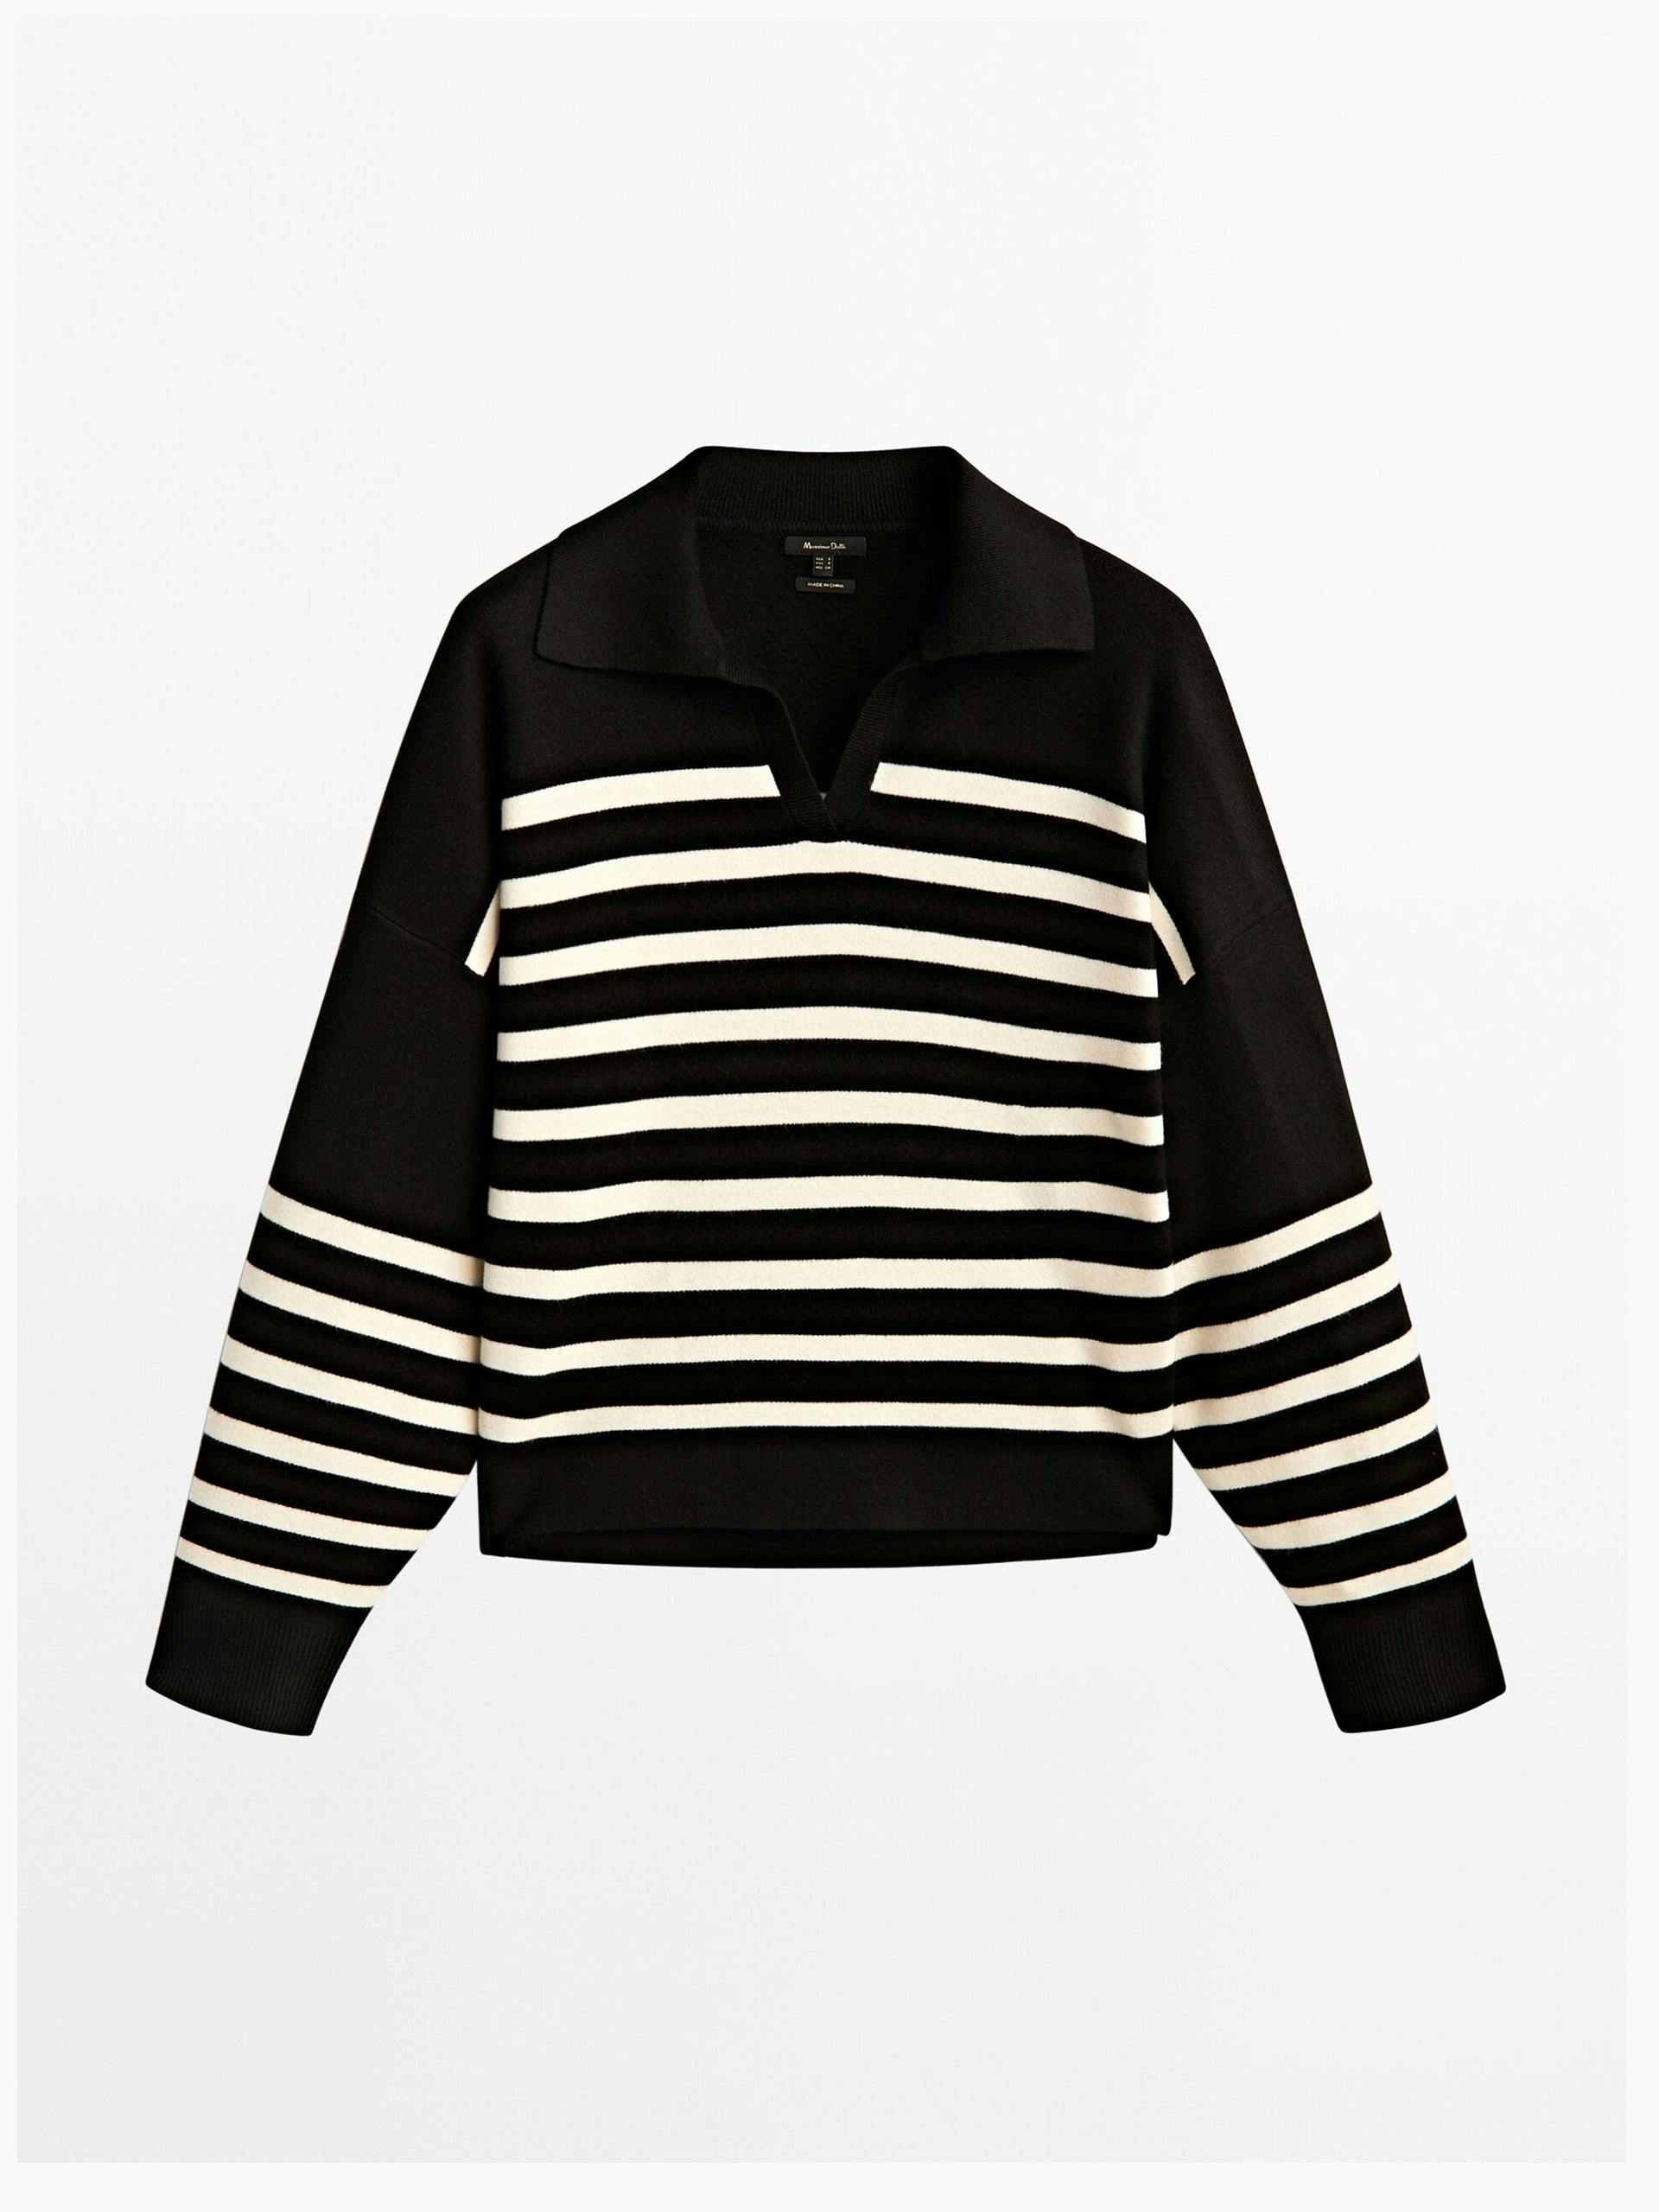 Striped sweater with collar